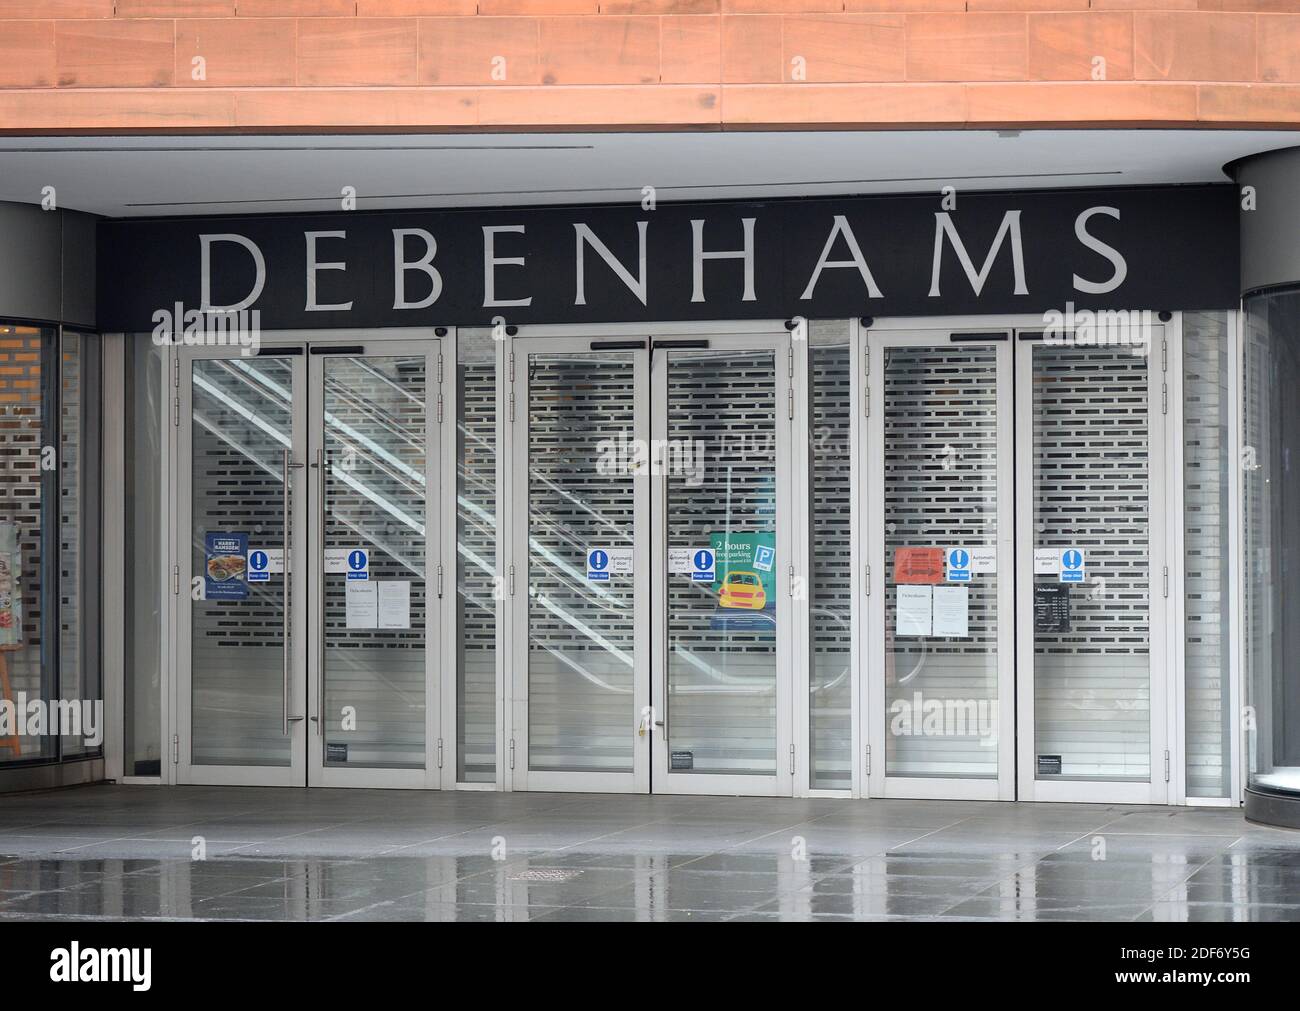 General view of the closed Debenhams store in Liverpool city centre, which is set to file for administration, after the Covid-19 Coronavirus lockdown forced it to shut its shops across the UK.  Debenhams announced today, on April 6, 2020 that it was having to file for administration as a consequence of having to shut all its stores across the UK under the covid-19 coronavirus lockdown. This is to be the second time in a year that the struggling retailer has filed for administration. Its present predicament comes not long after its permanent closure of 22 stores, resulting in more than 700 job Stock Photo